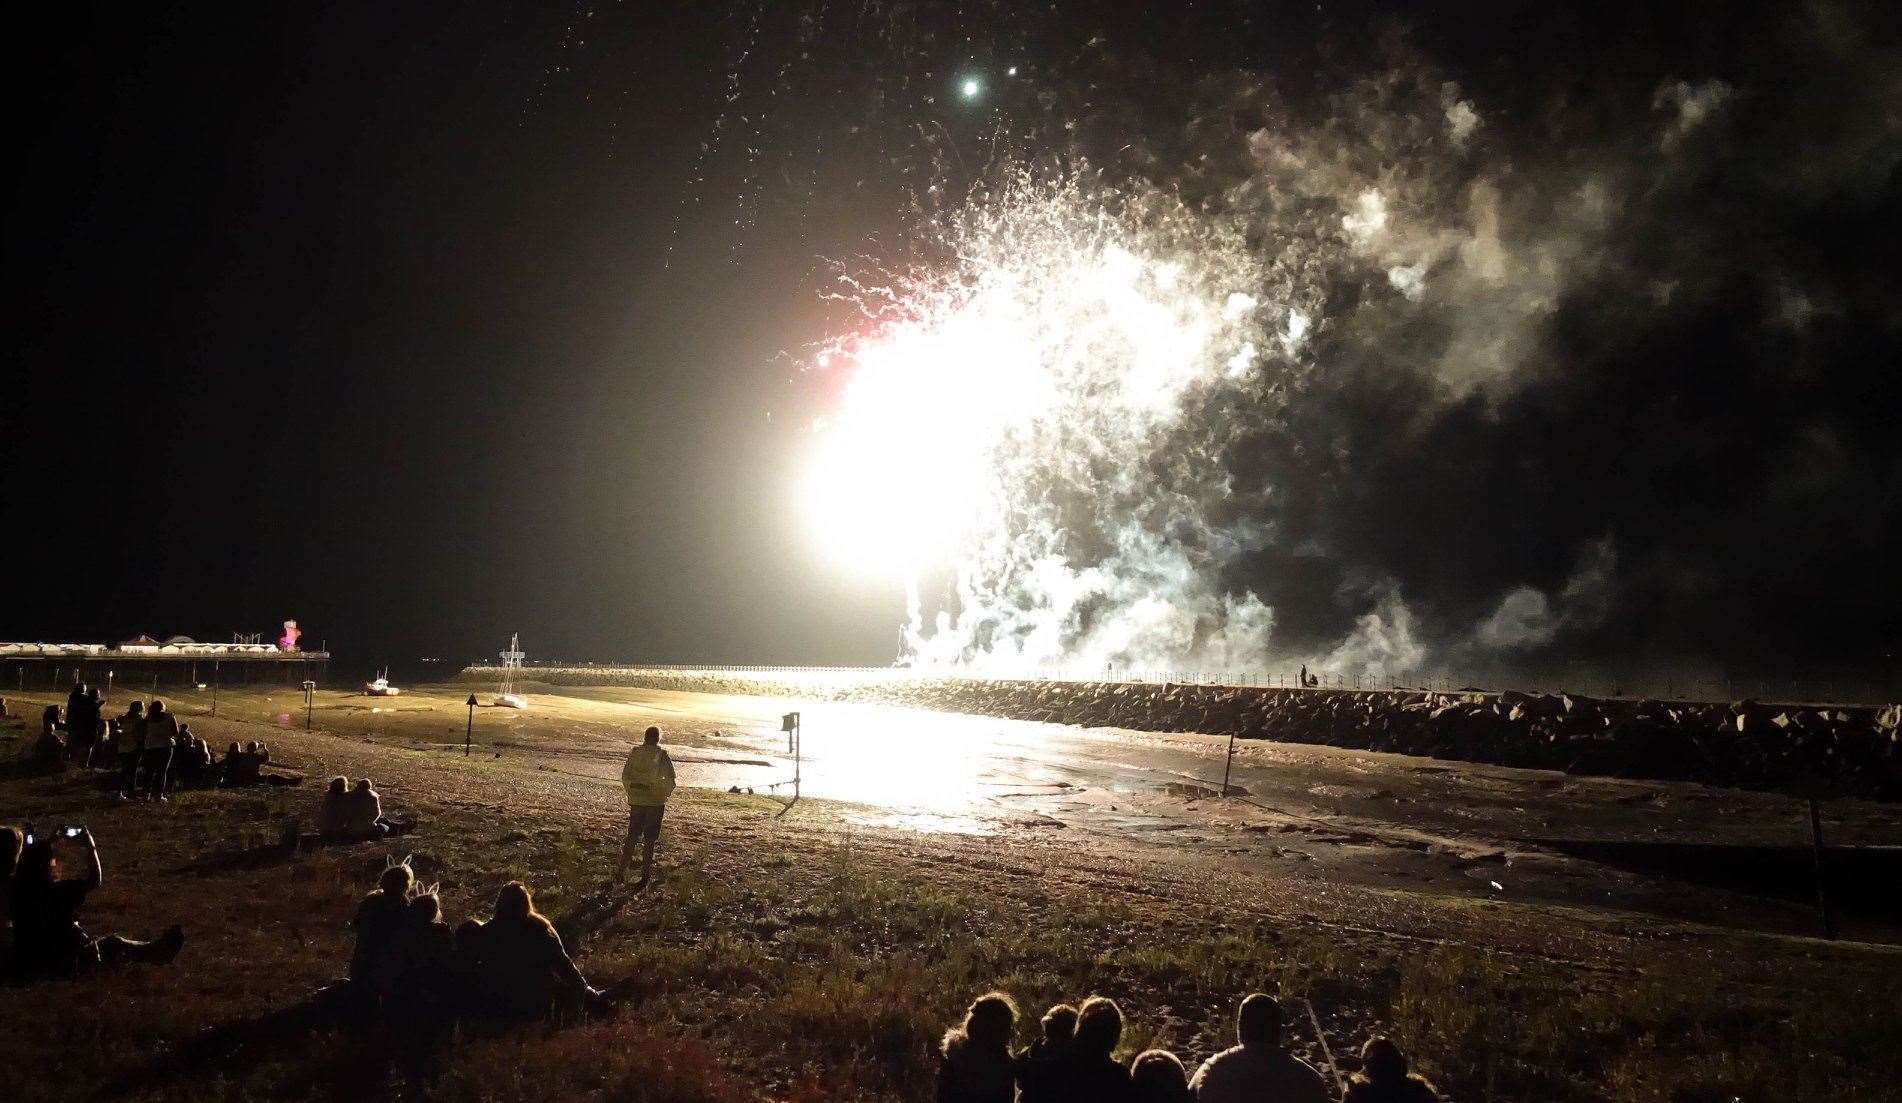 A previous fireworks display on Herne Bay beach Pic: Adrian Bennett